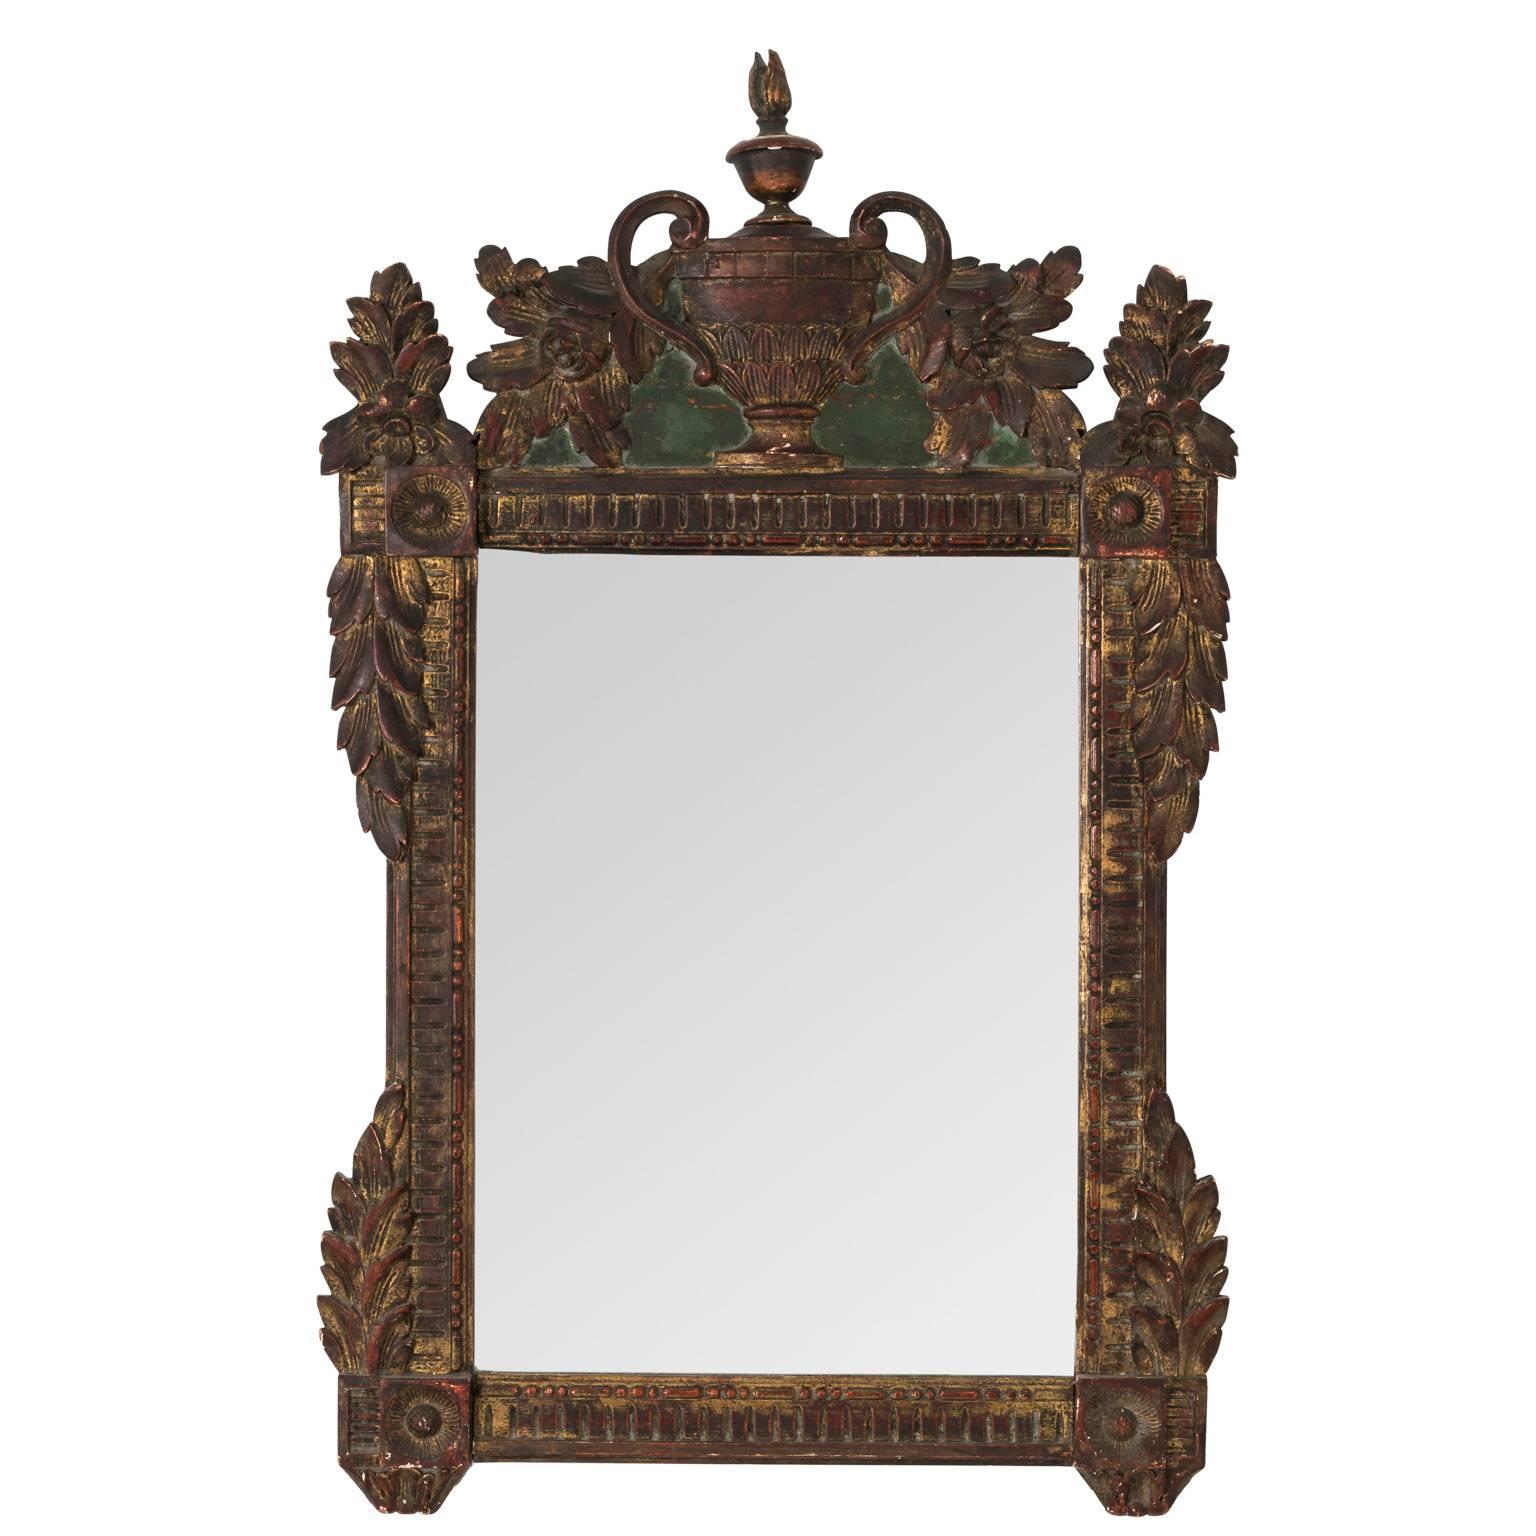 Early 19th Century French Mirror